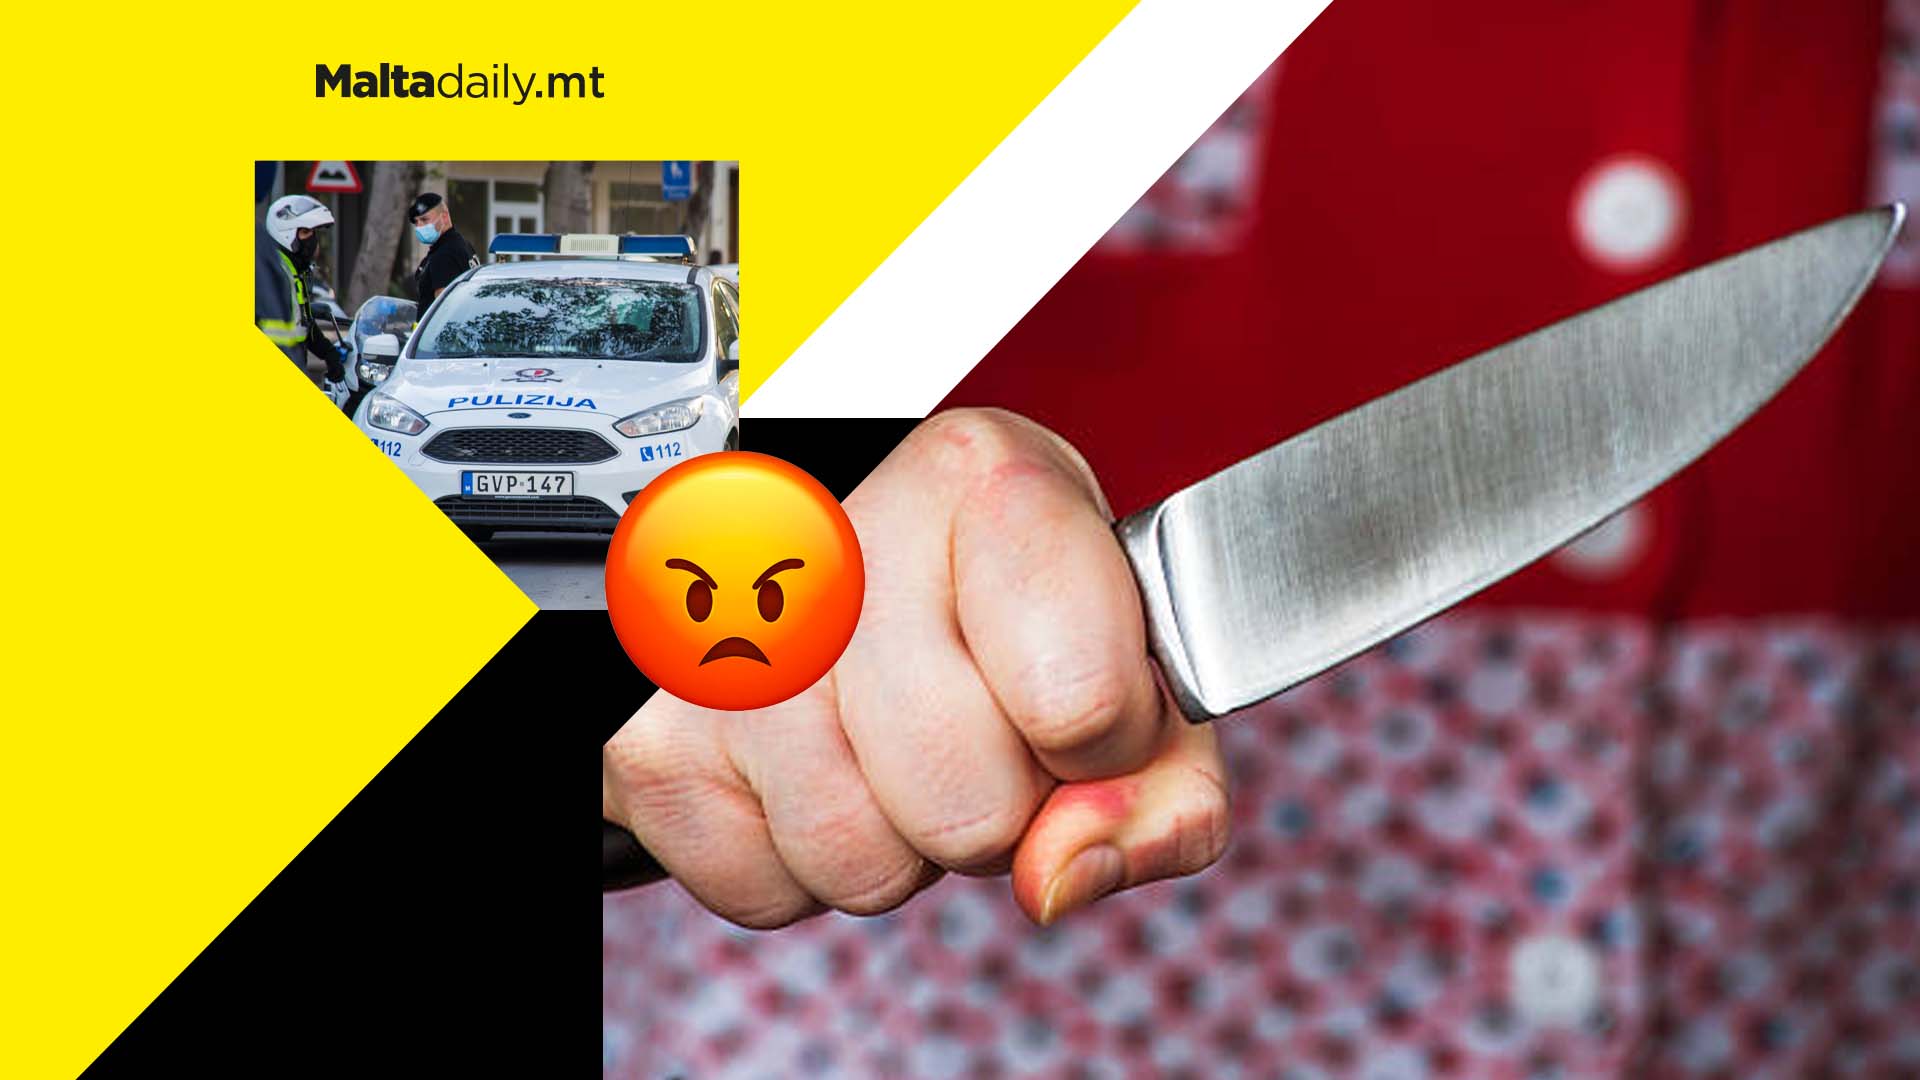 Woman hospitalised after knife attack with other woman in Ta’ Xbiex